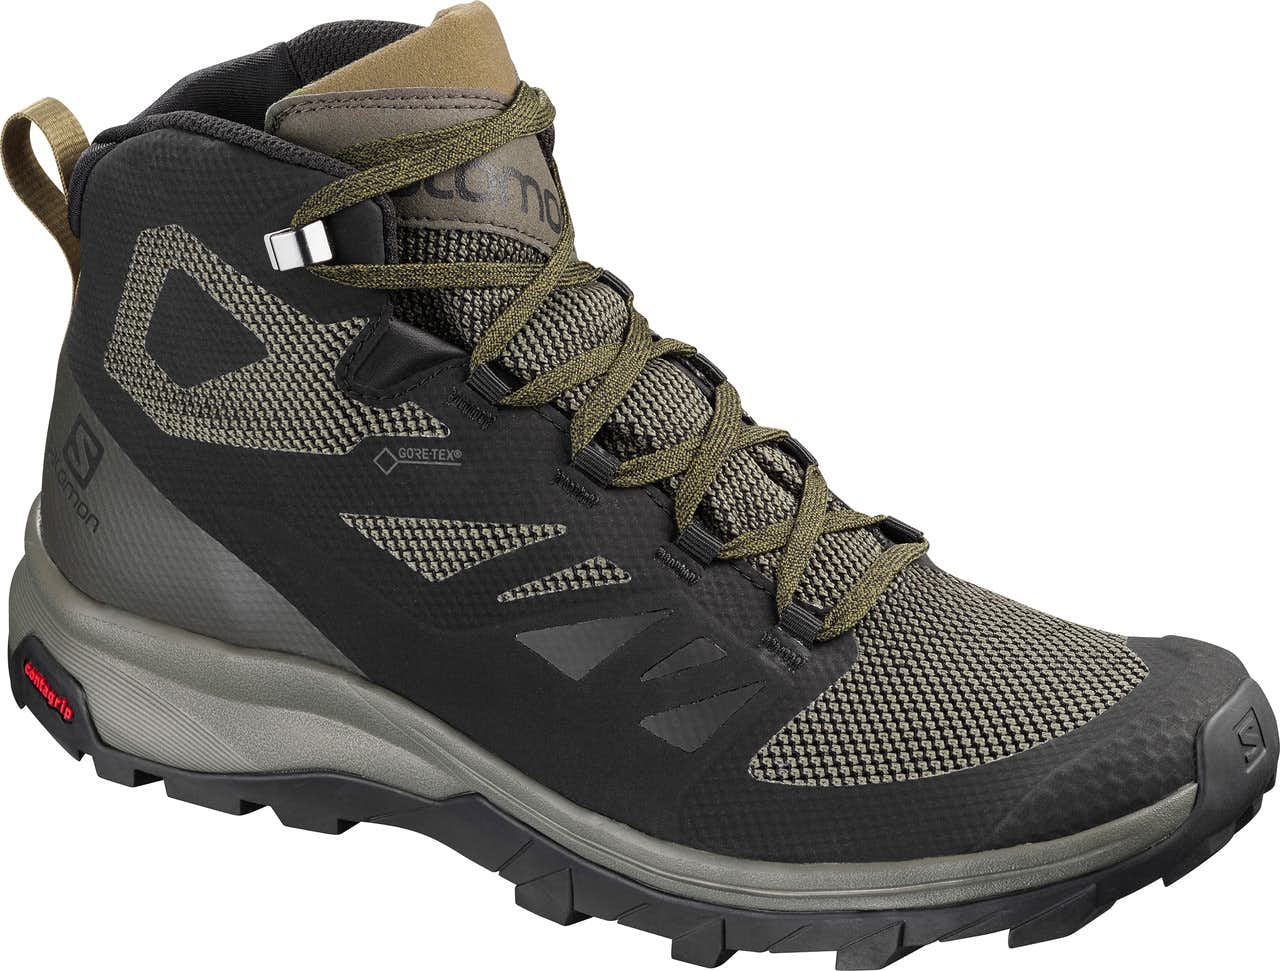 OUTline Mid Gore-Tex Light Trail Shoes Black/Beluga/Capers